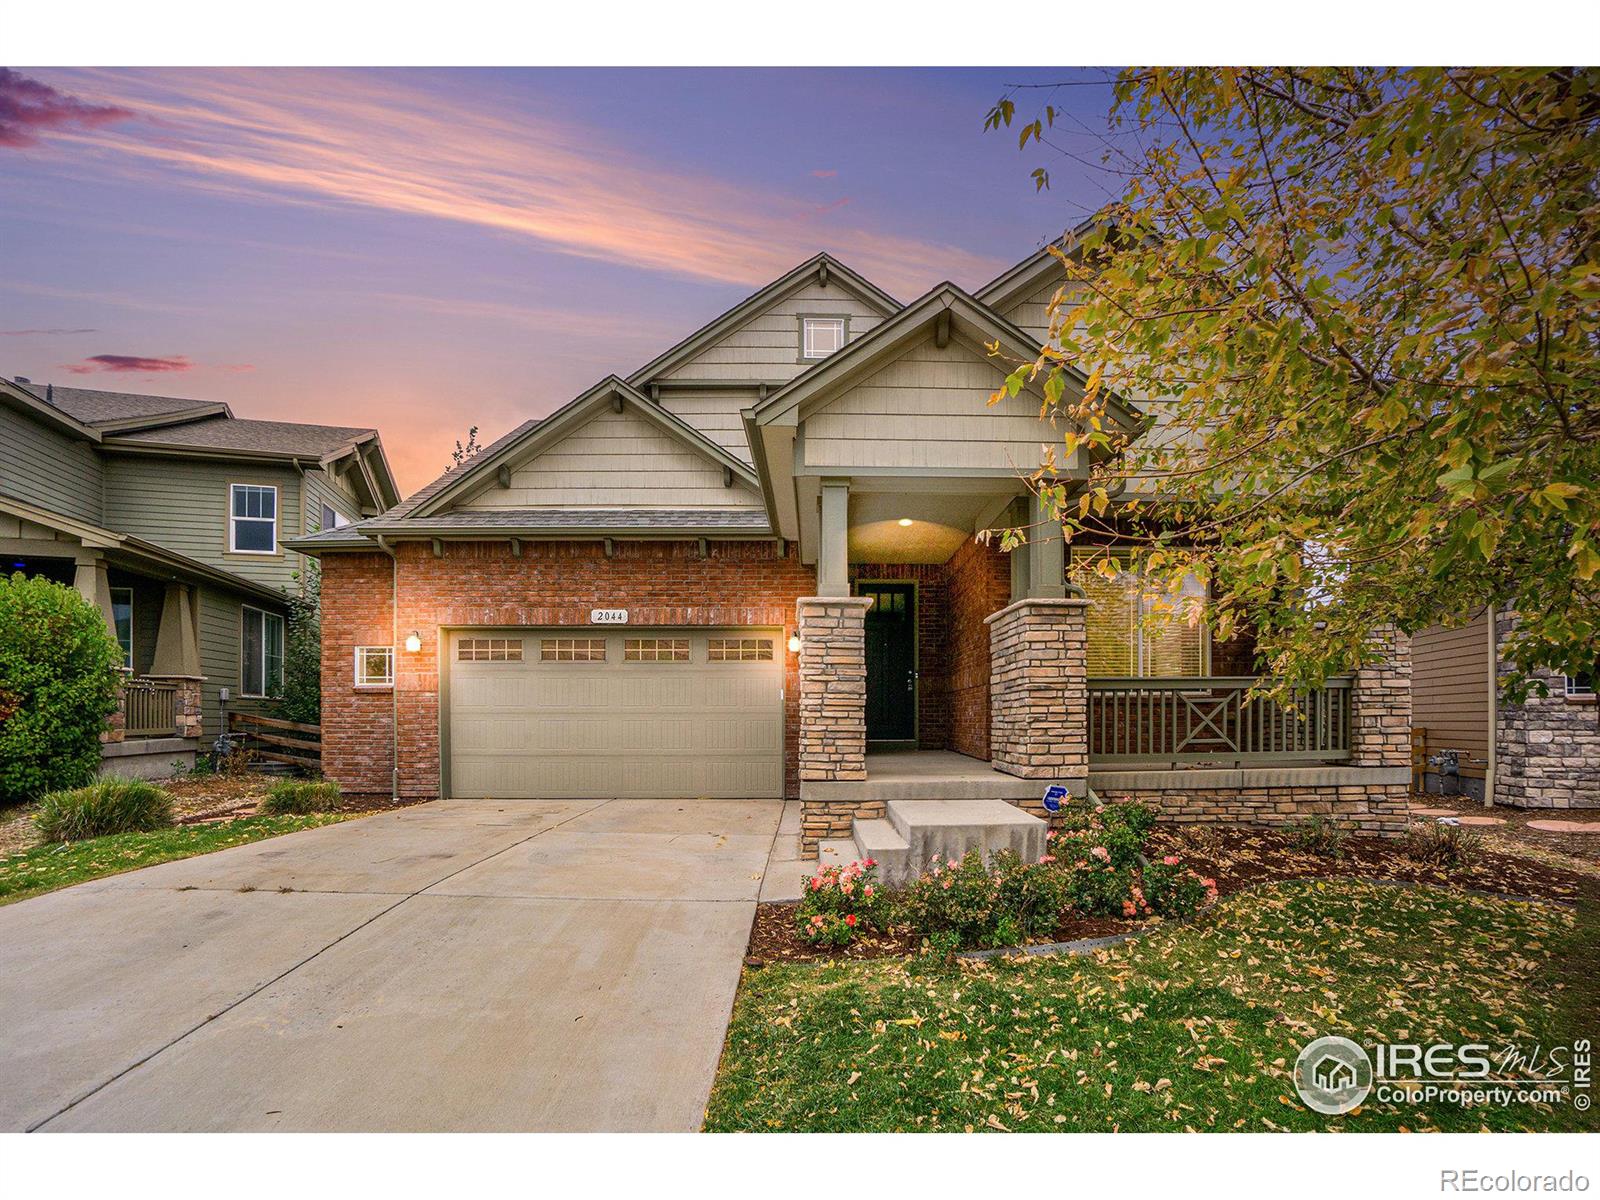 2044  Cutting Horse Drive, fort collins MLS: 456789998252 Beds: 5 Baths: 3 Price: $725,000